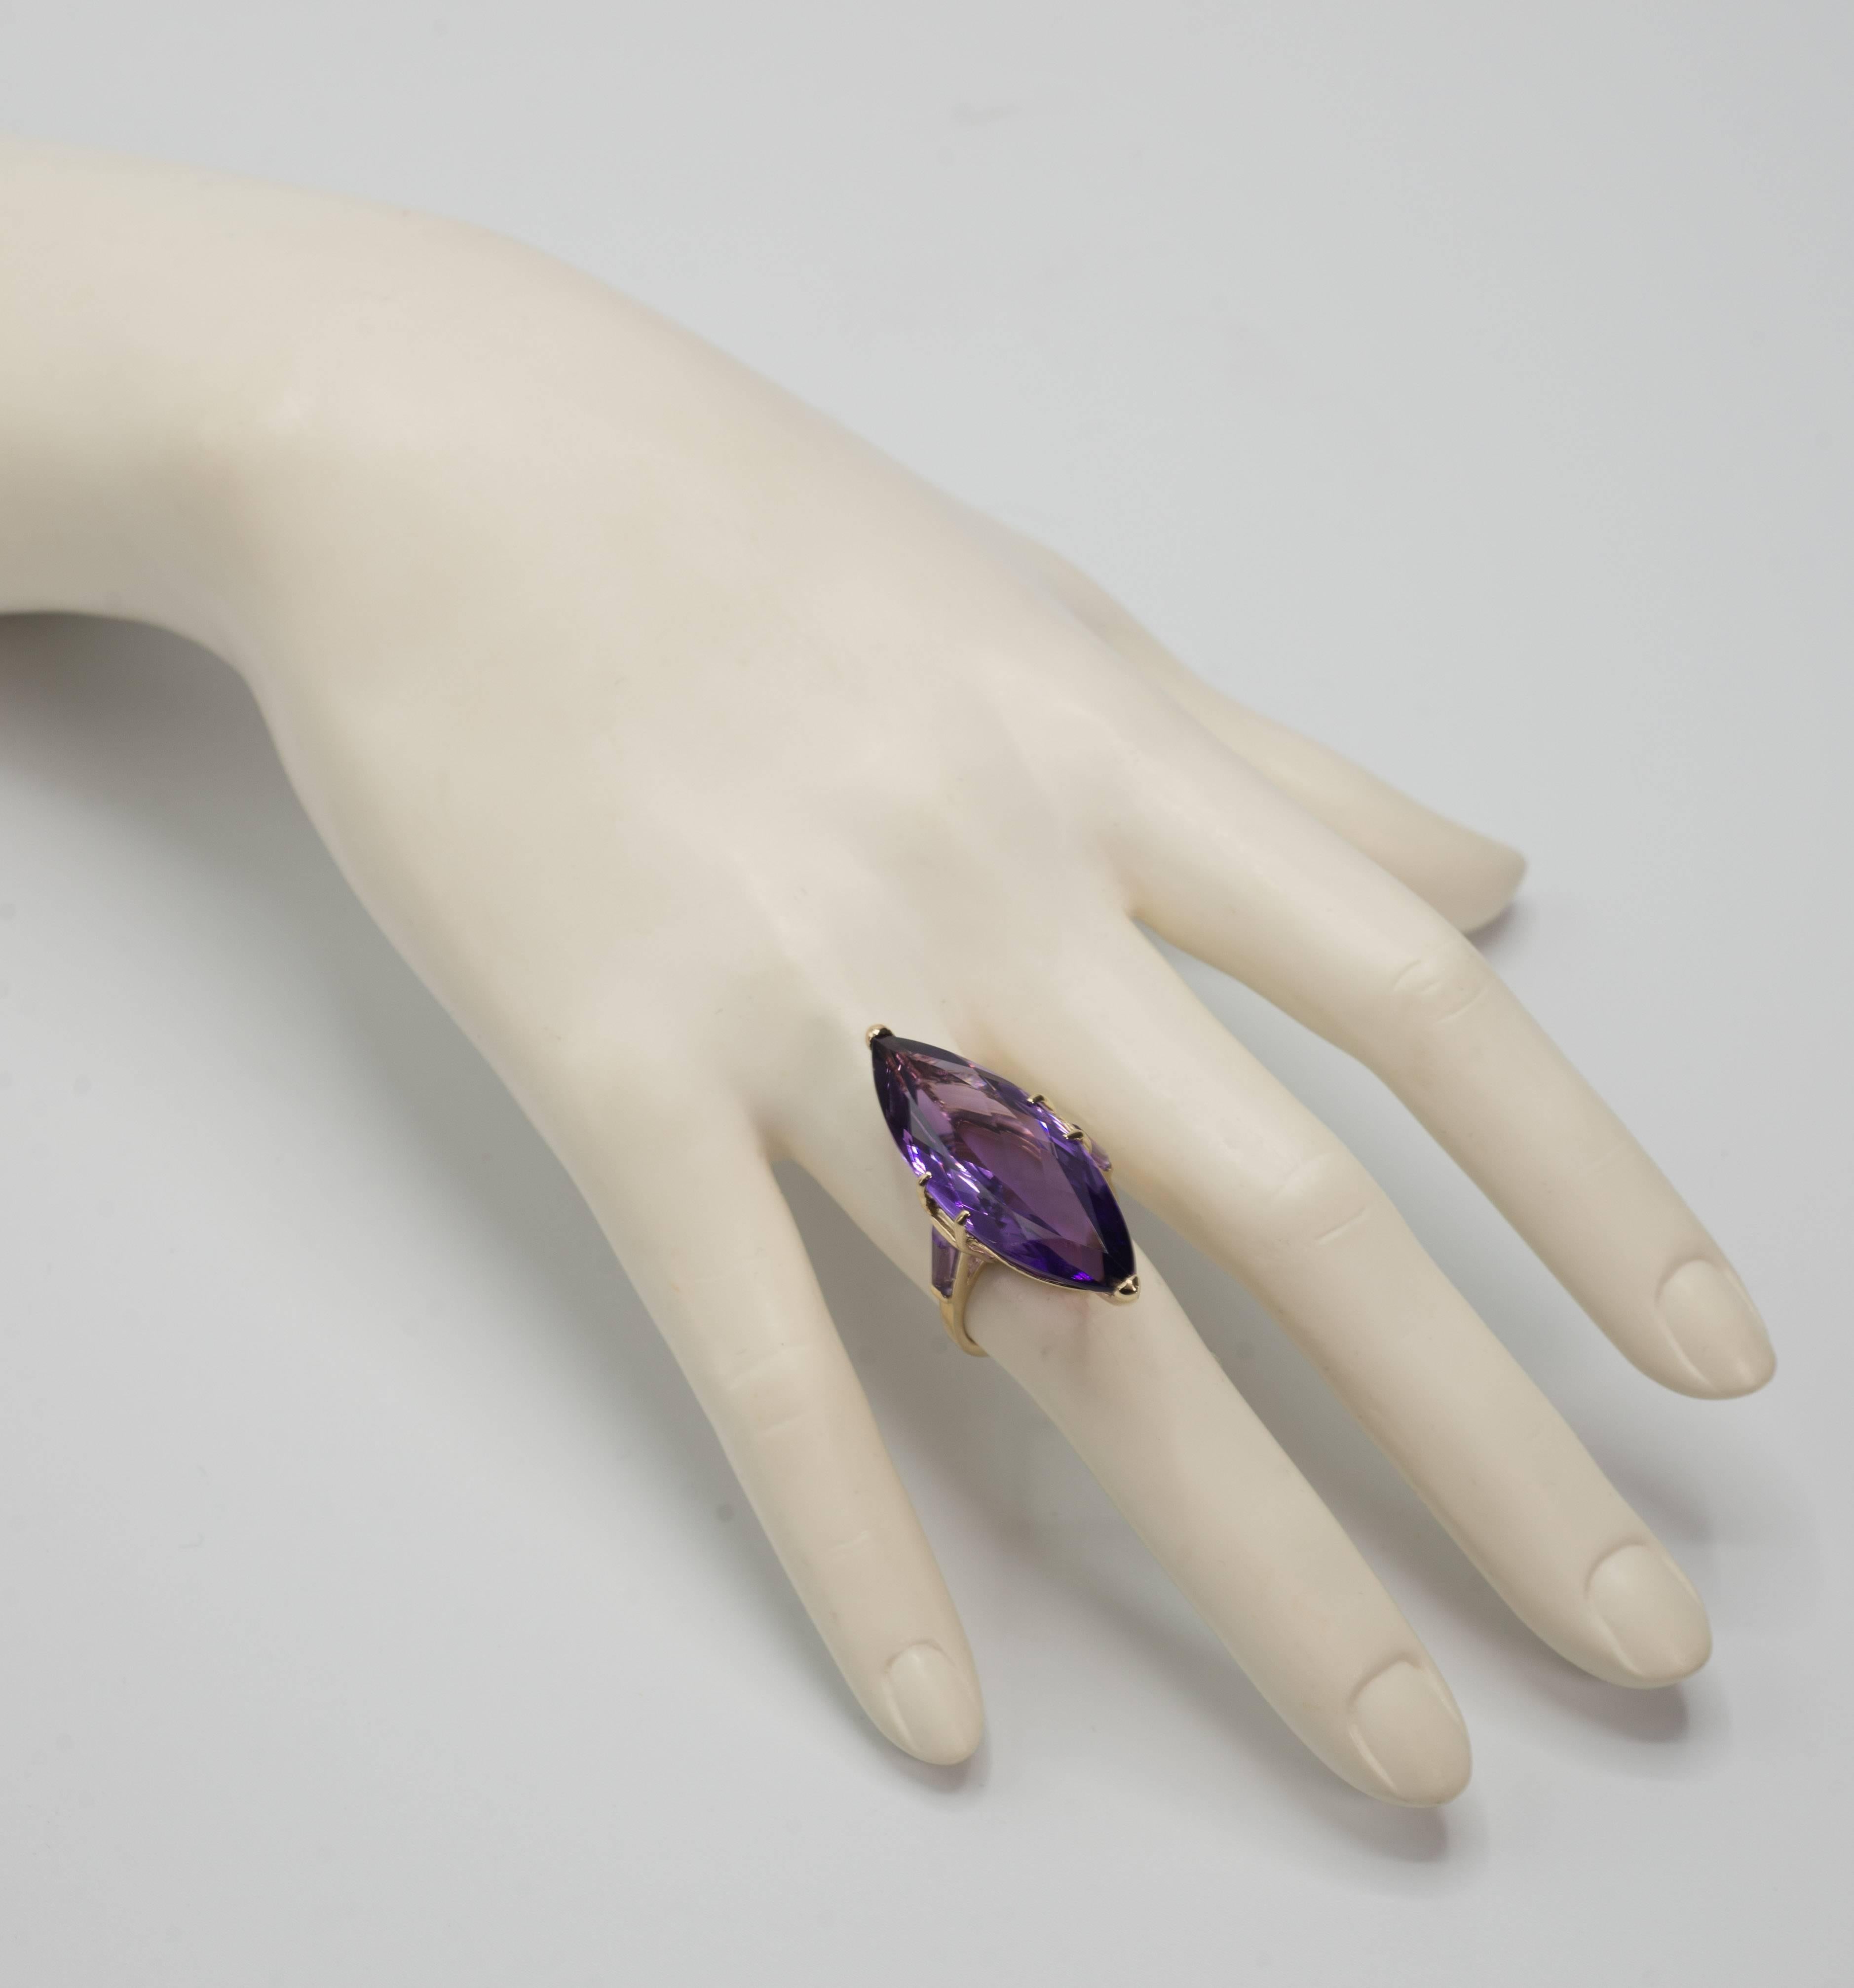 Large  purple Amethyst marquise cut  matching side taper baguettes yellow 14karat gold ring. The Amethyst weighs approximately 25 carats set in 14karat yellow gold. The ring is 1.5 inches long by .75 inches wide. Sizing is free. Special order takes